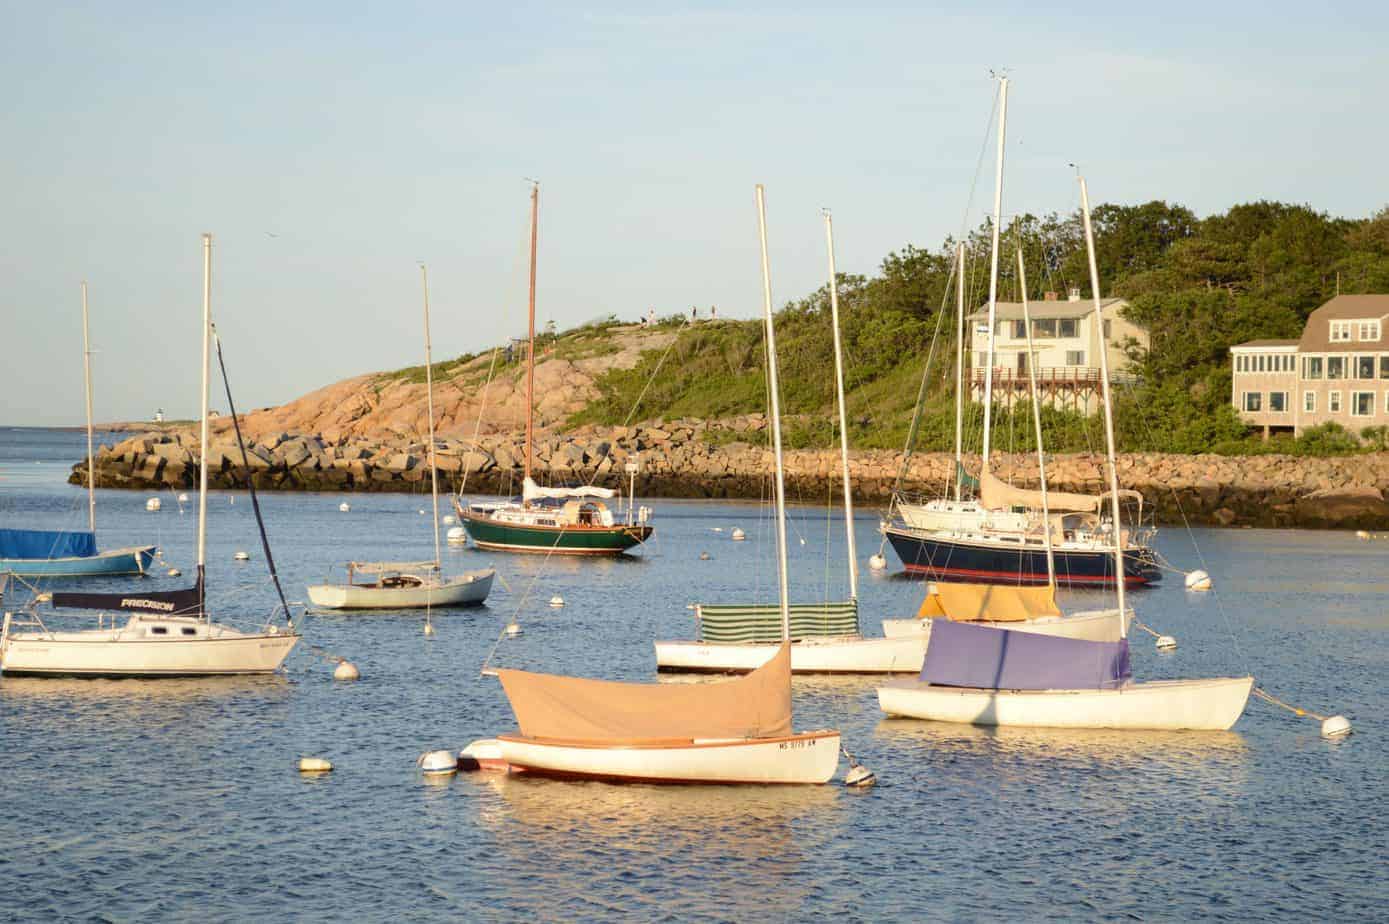 Best Rockport Ma Hotels Where To Stay In Rockport For A Great Trip